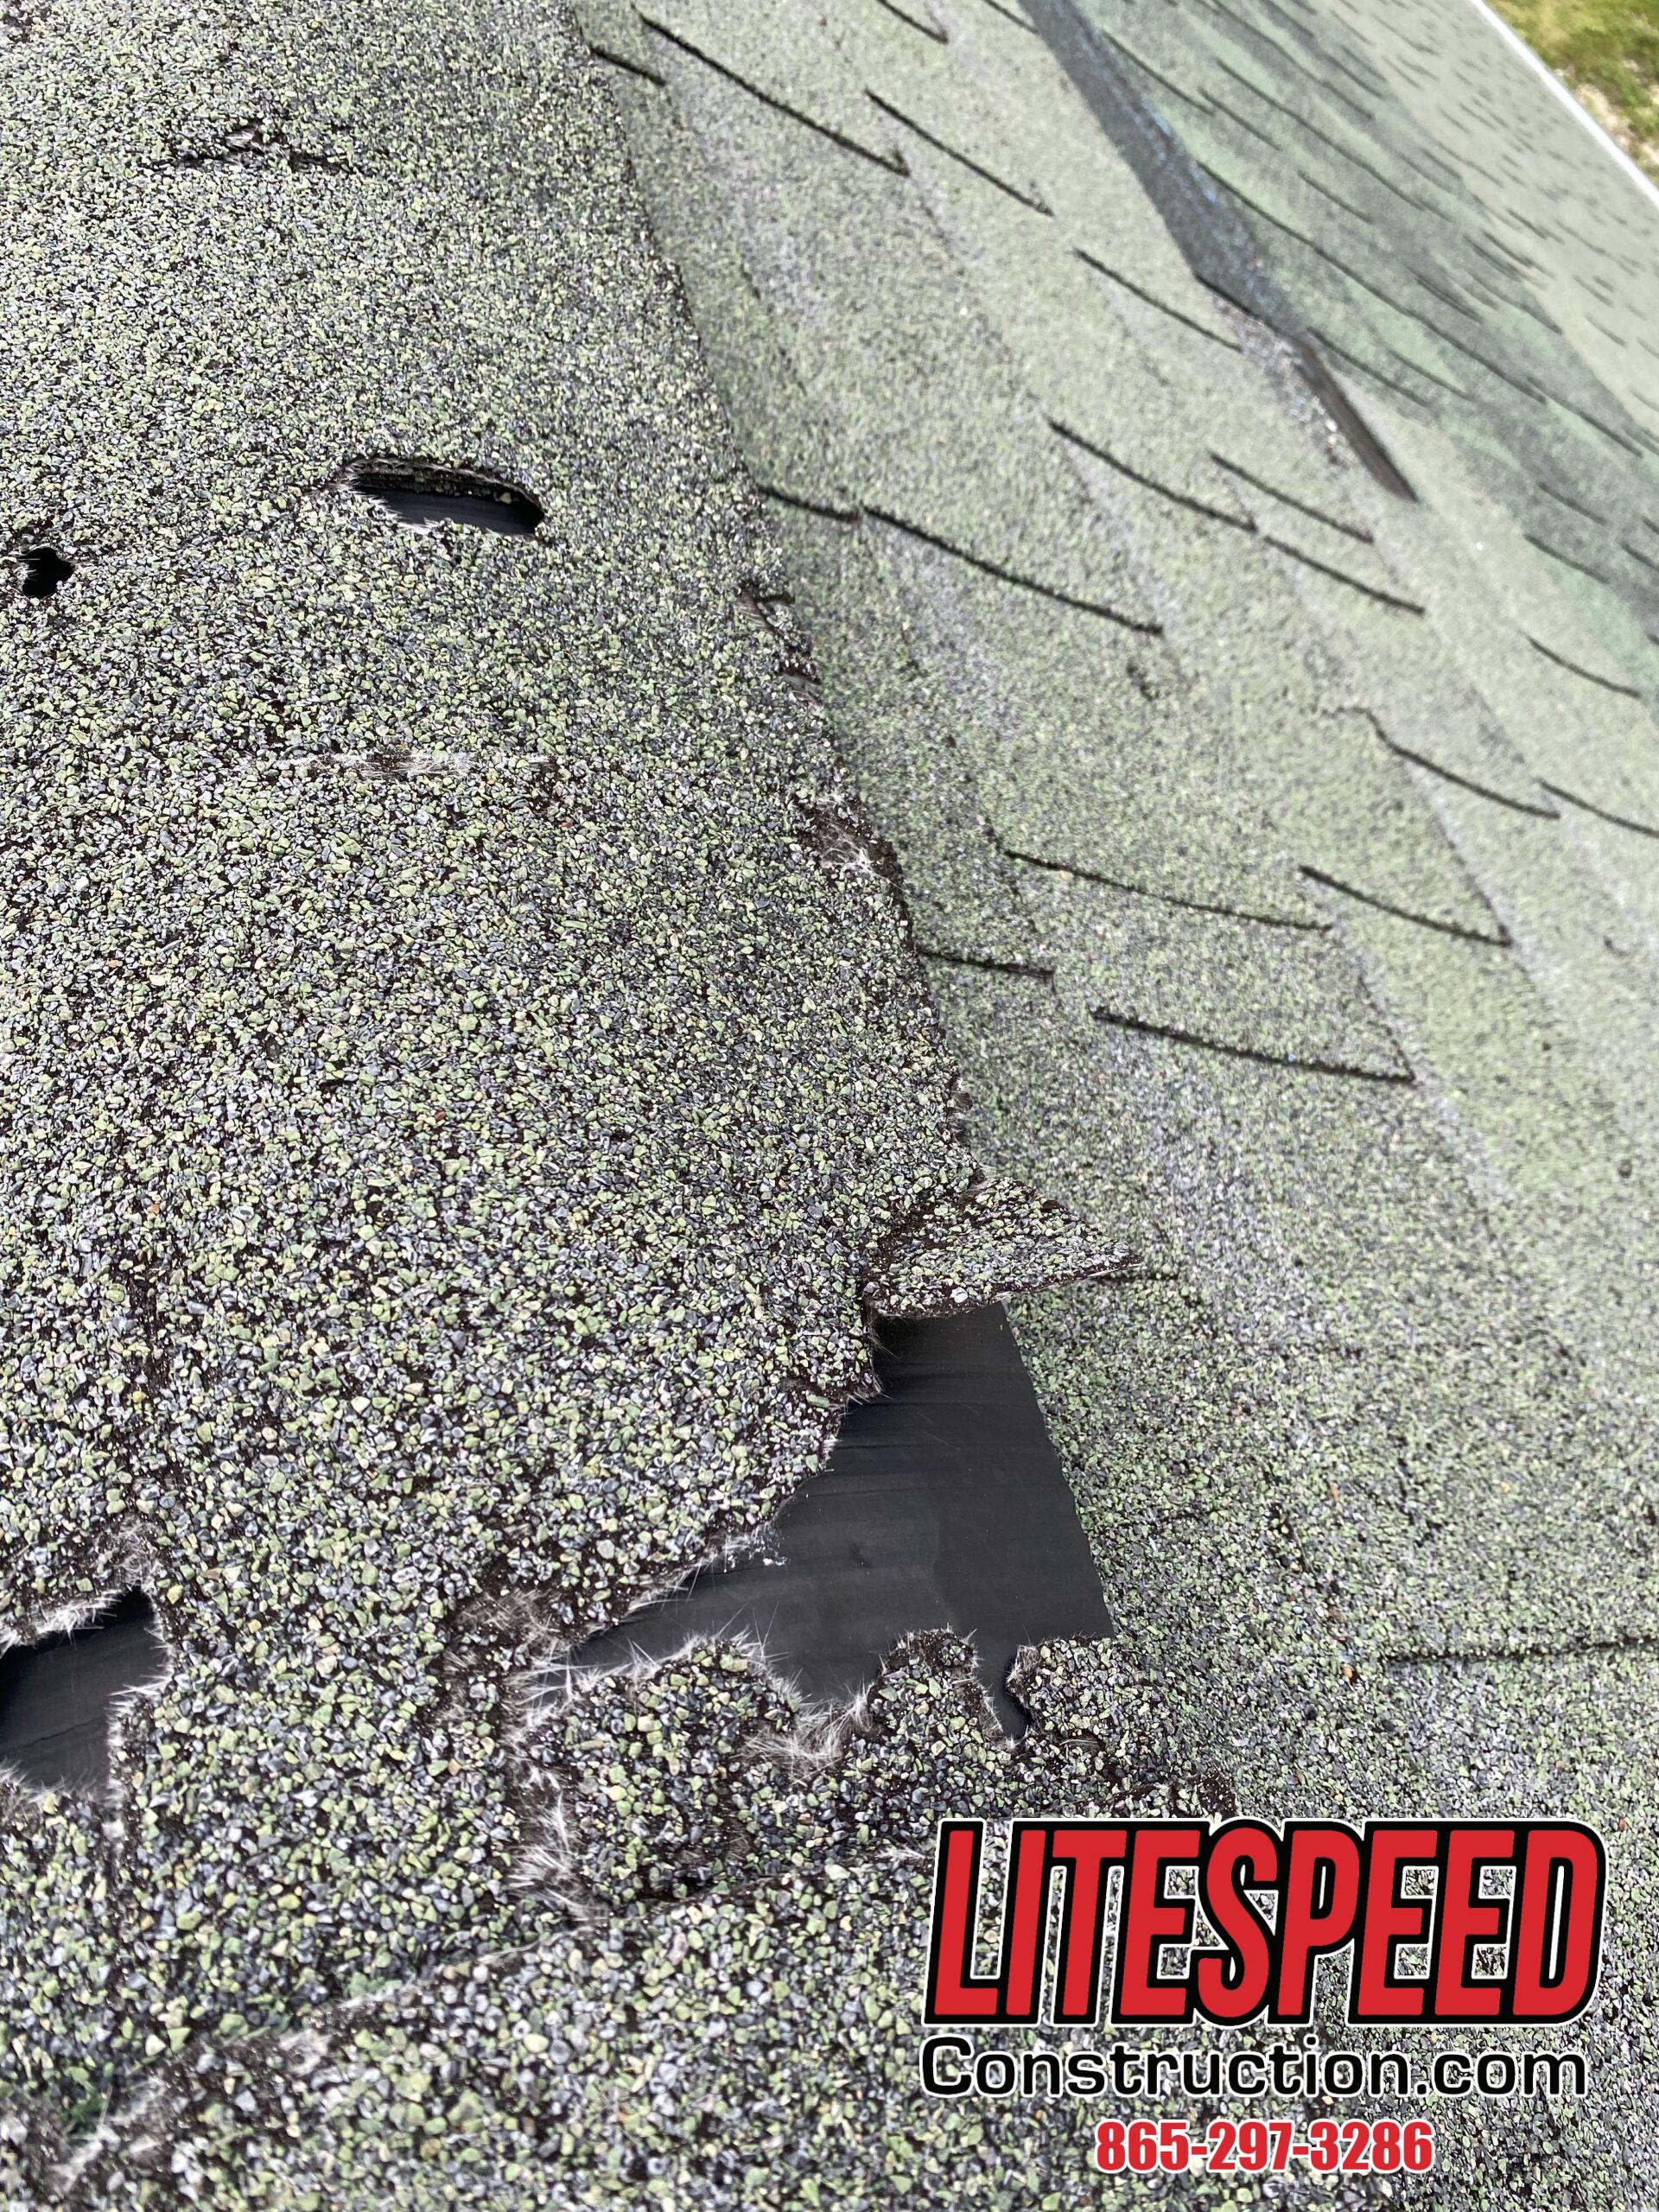 This is a picture of a green ridge cap shingle that is broken